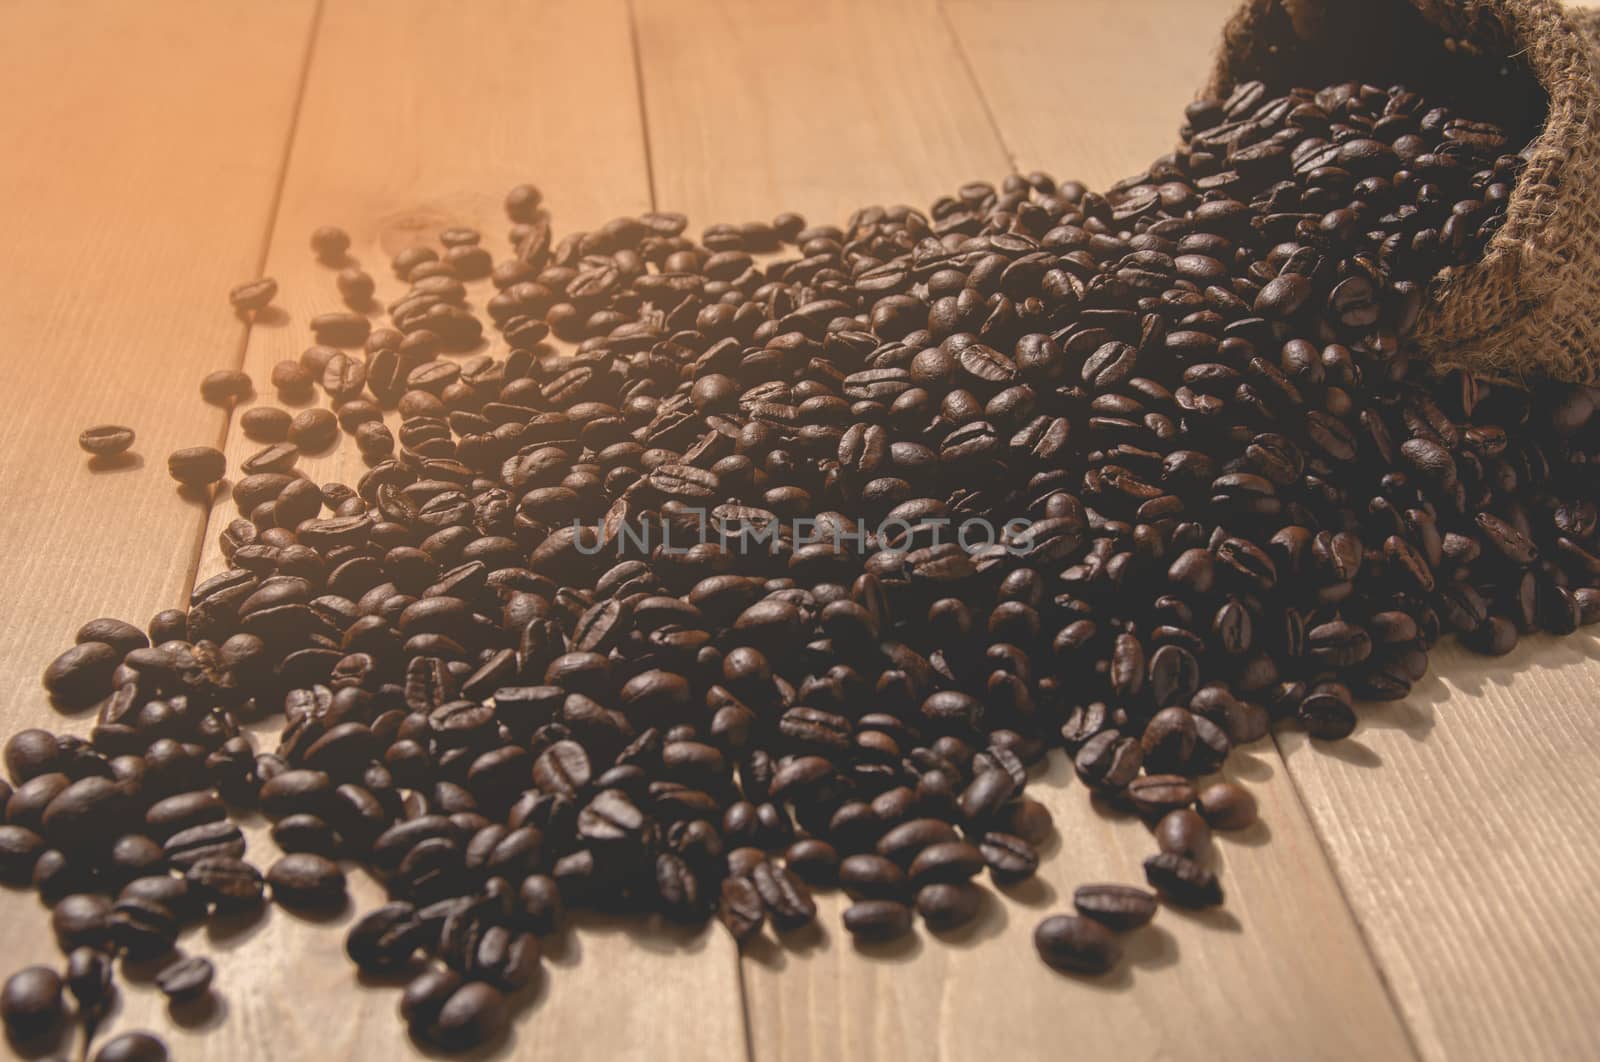 Coffee beans with sack bag on wooden table background.